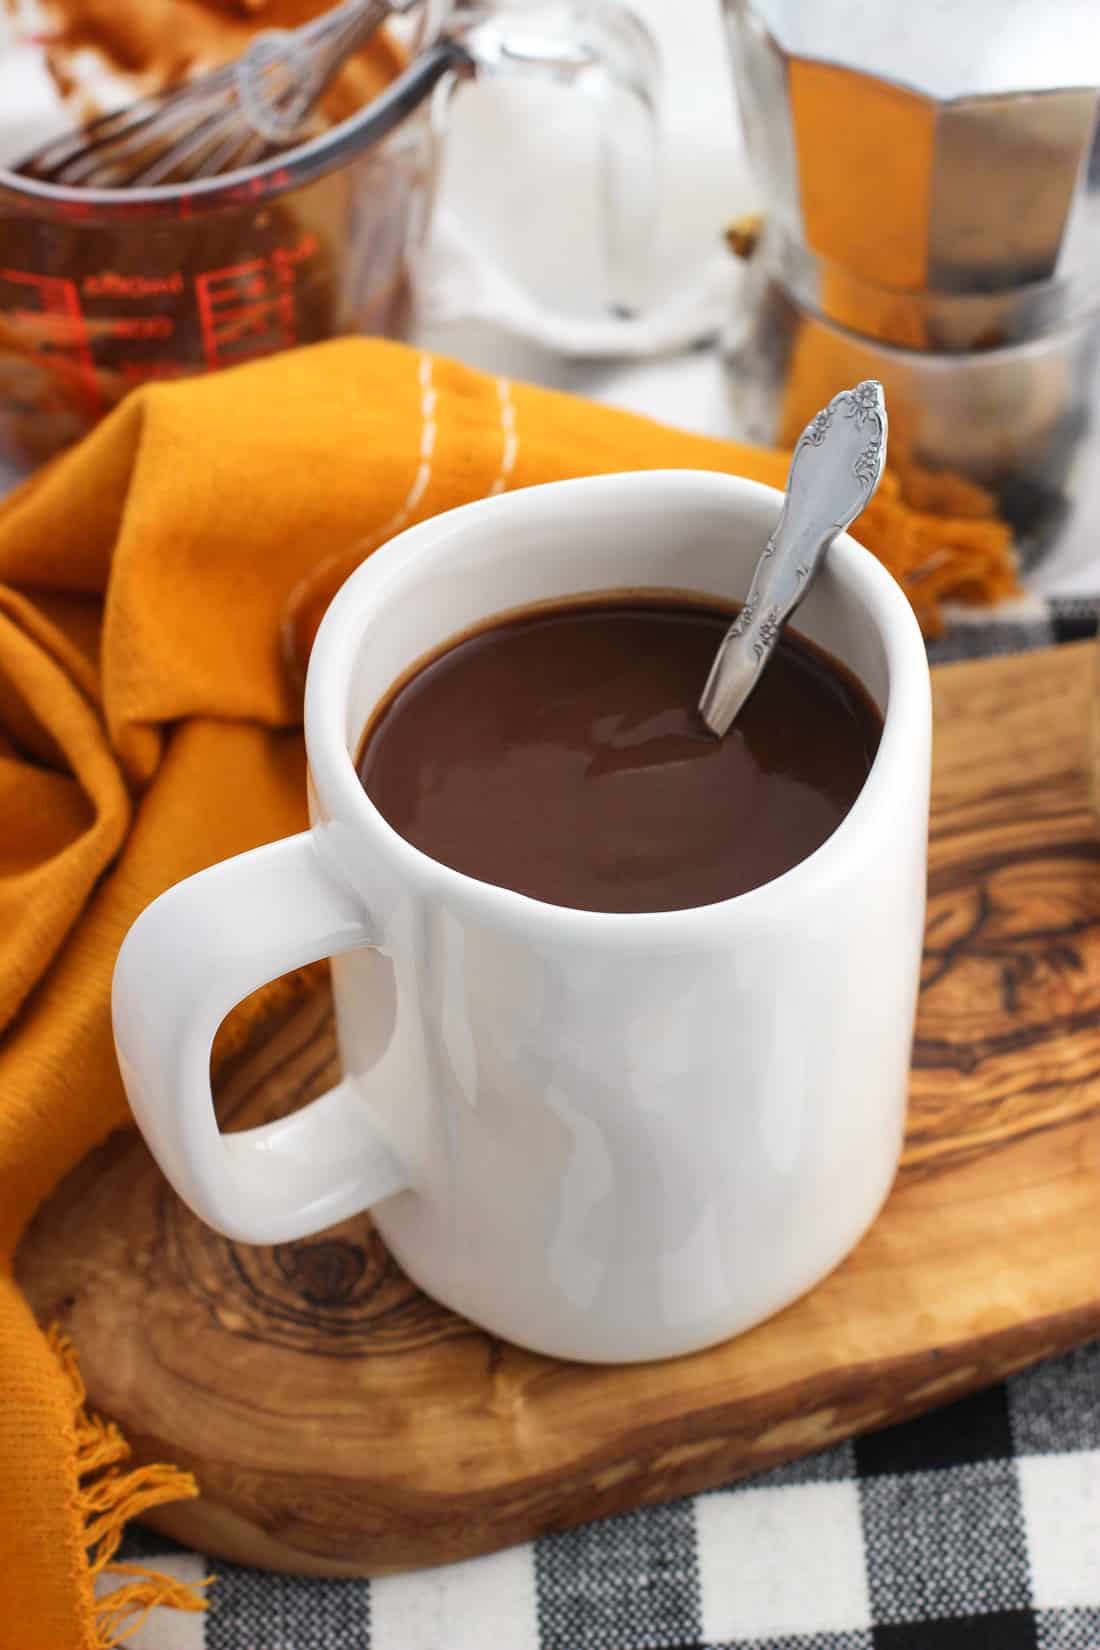 A large mug of hot chocolate with a spoon in it on a wooden tray.